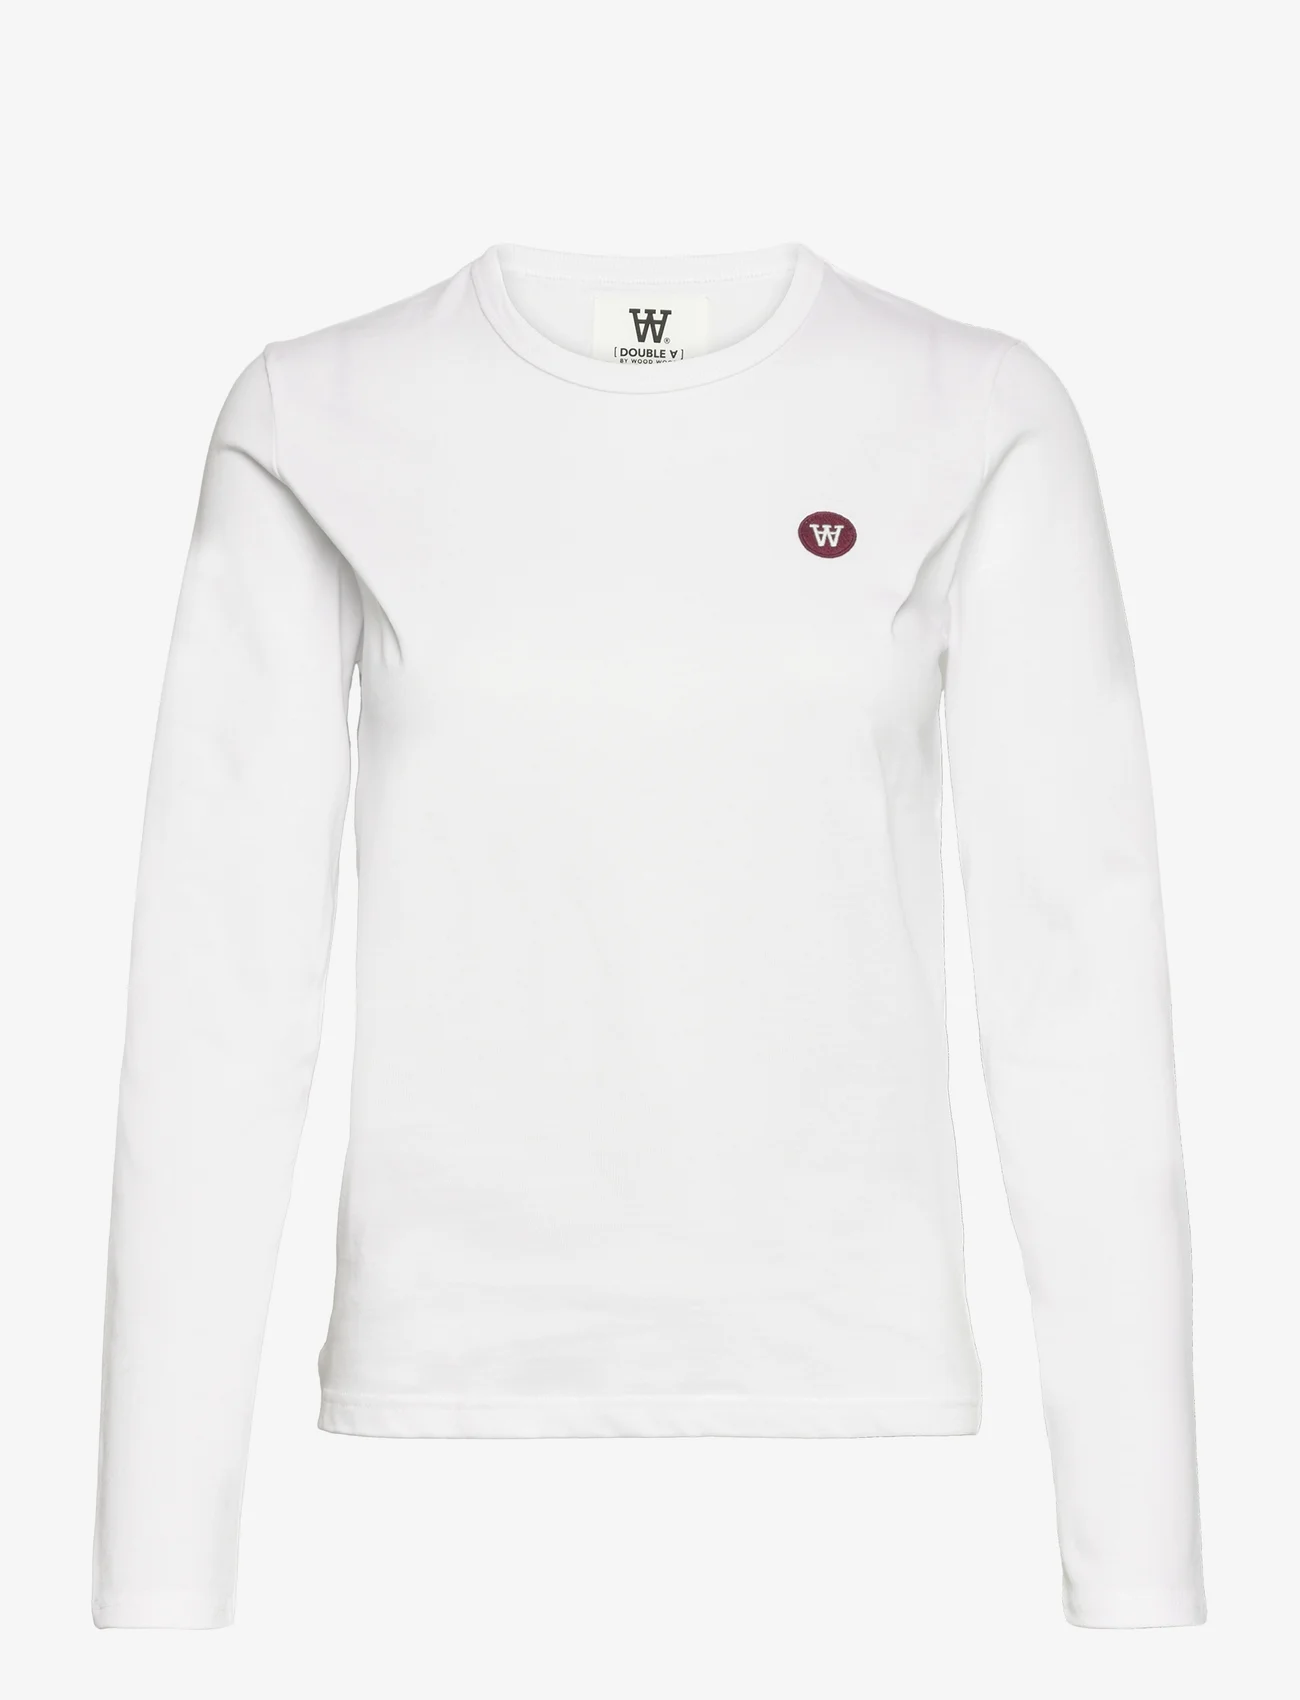 Double A by Wood Wood - Moa longsleeve - t-shirts & tops - white - 0